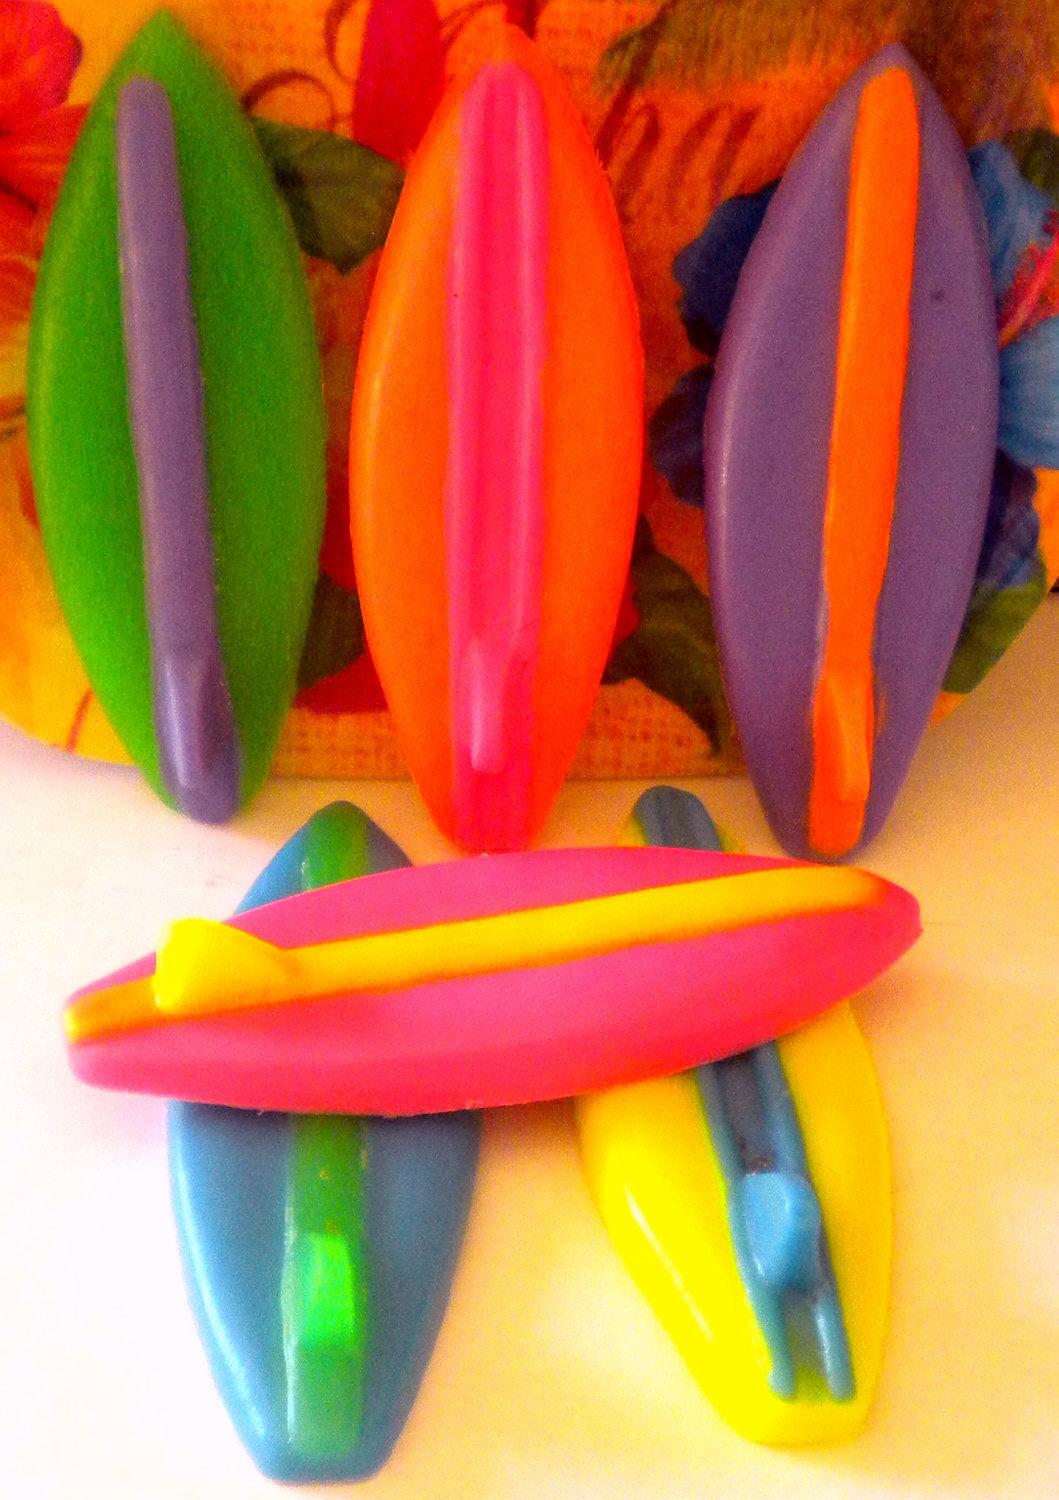 Soap - Surf Boards - 6 Soaps - Party Favors - Birthdays - Luaus - Tropical Parites